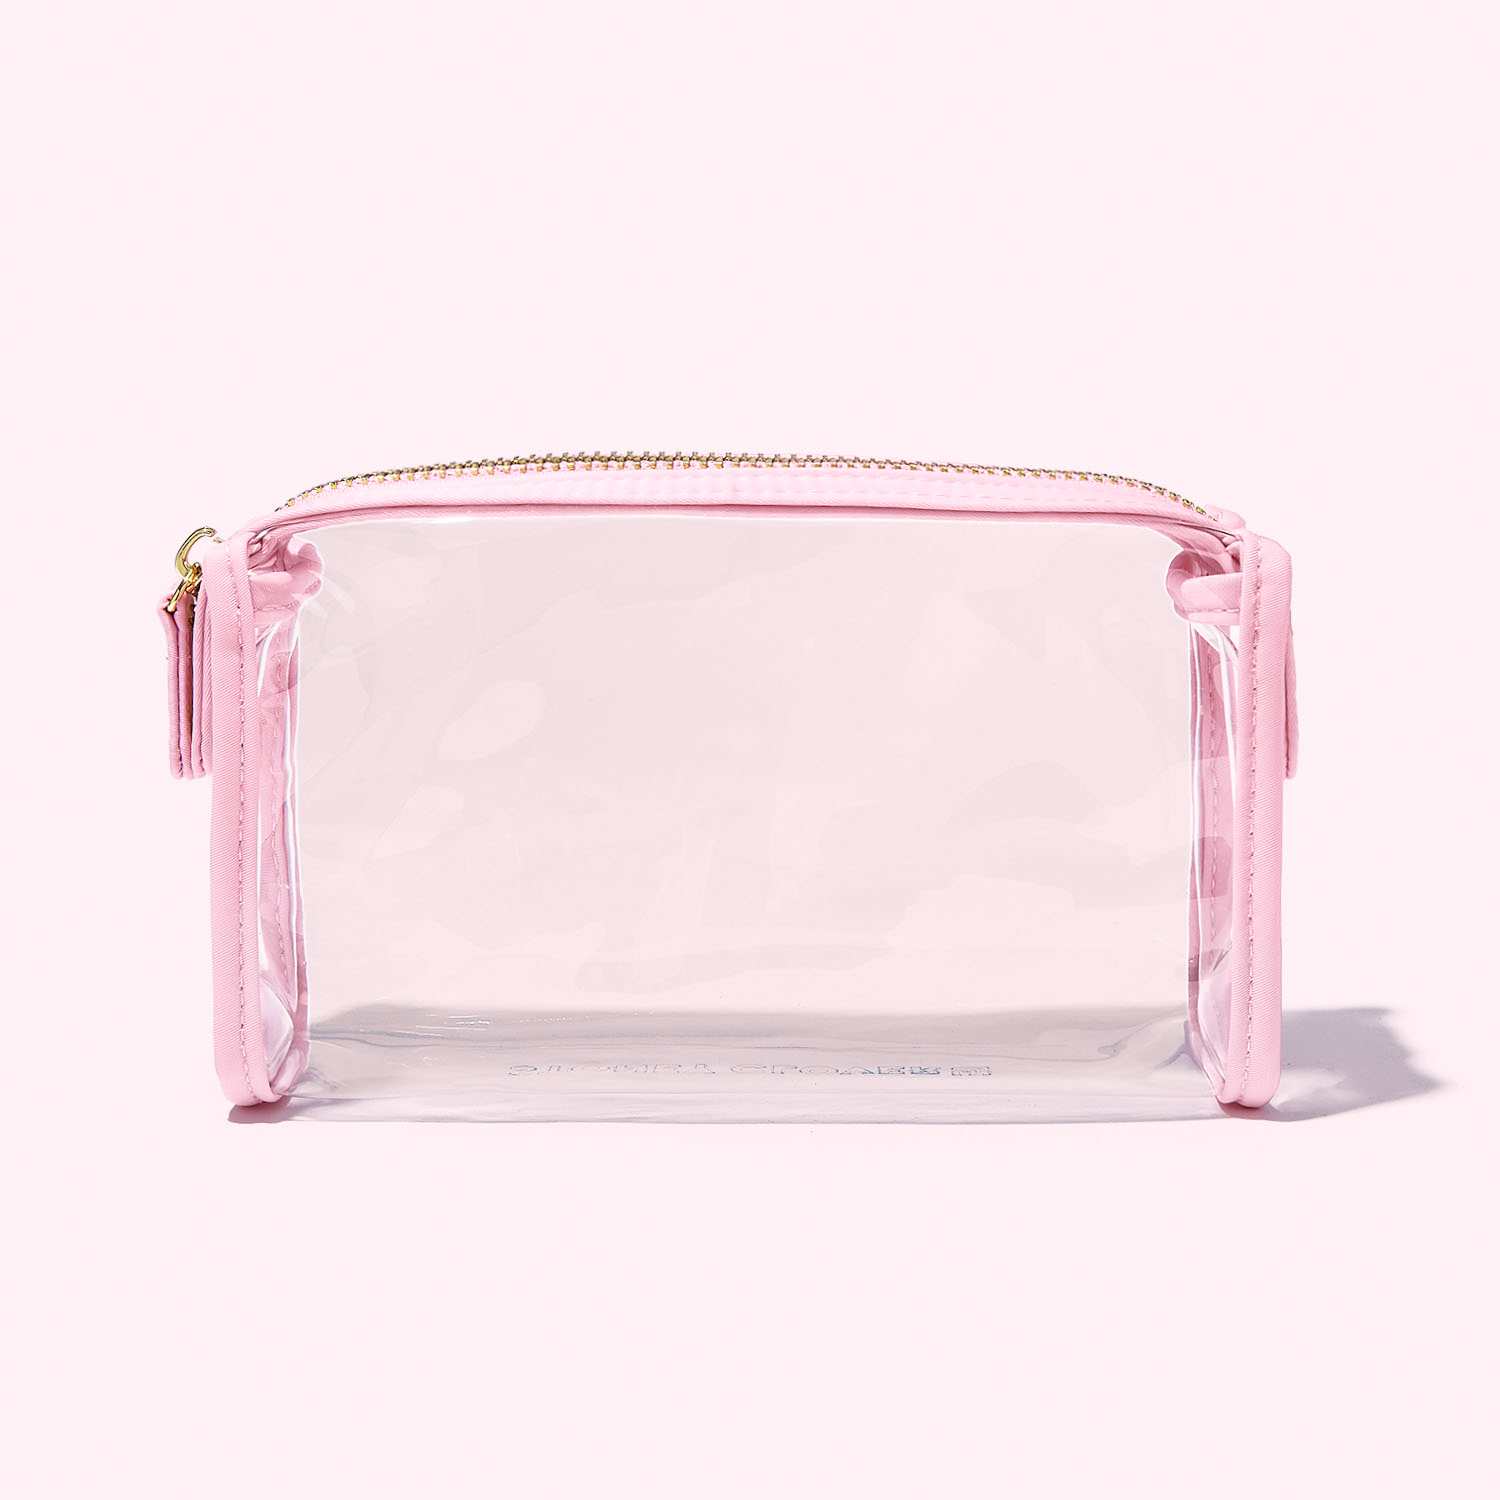 https://cdn.accentuate.io/31806258675792/1677774831841/SCL-ClearTravelPouch-Flamingo-007.jpg?v=1677774831841w_1500,h_1500